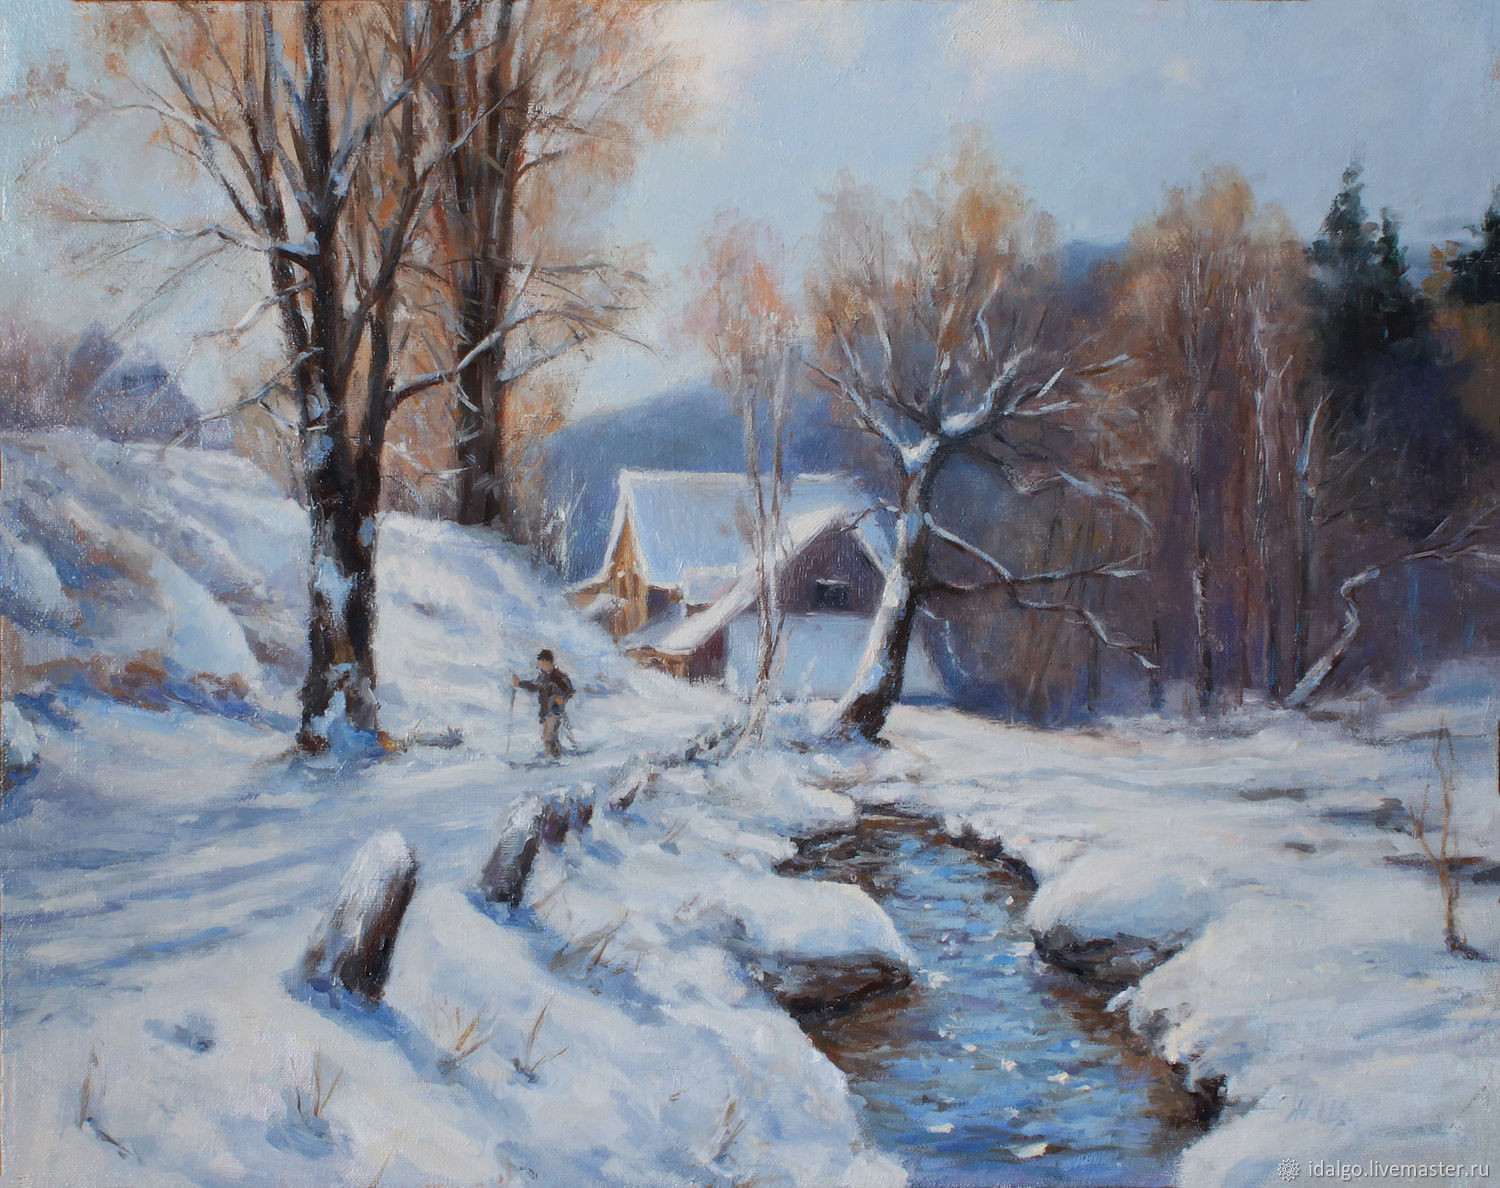 Winter Landscape Paintings
 Oil painting "Winter landscape with a skier" a copy of